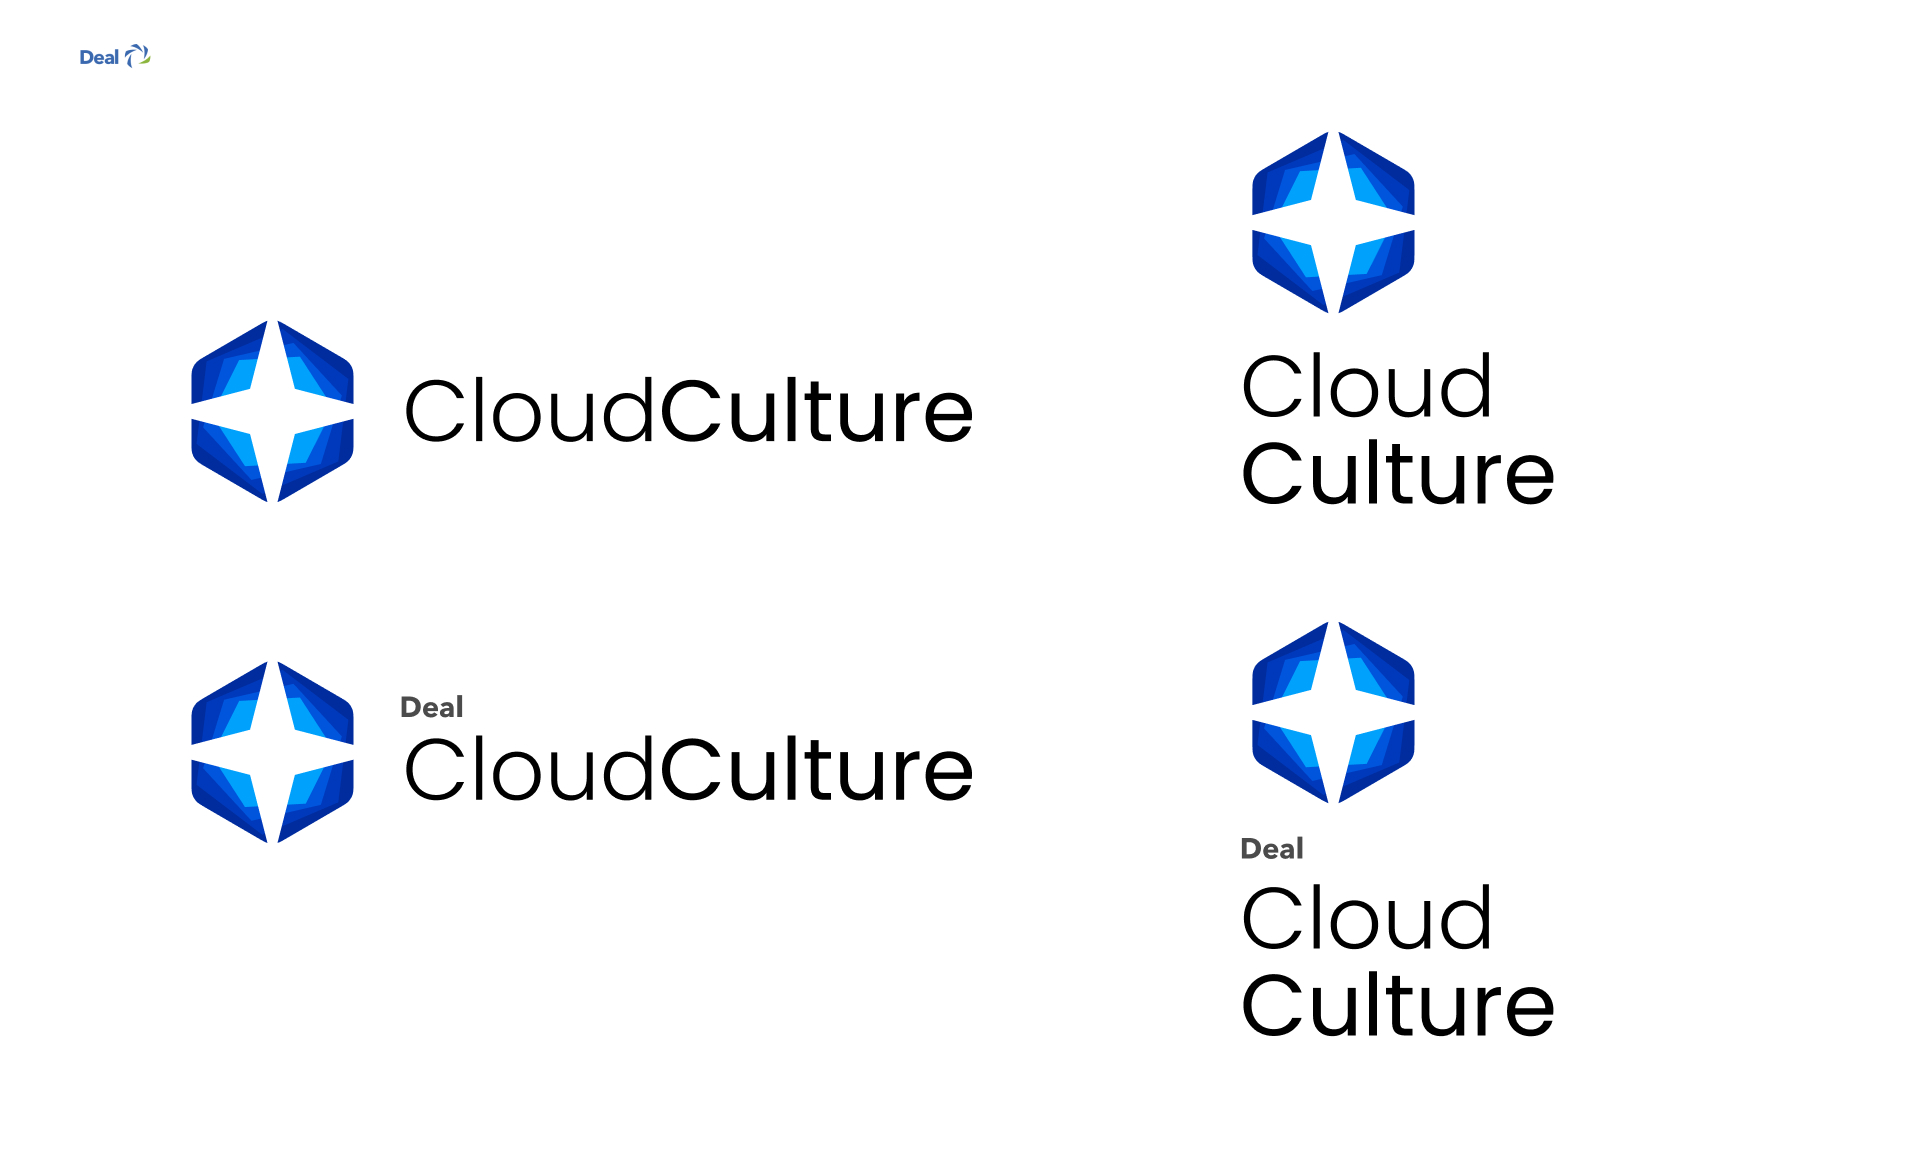 Cloud Culture branding over white background, in blue.